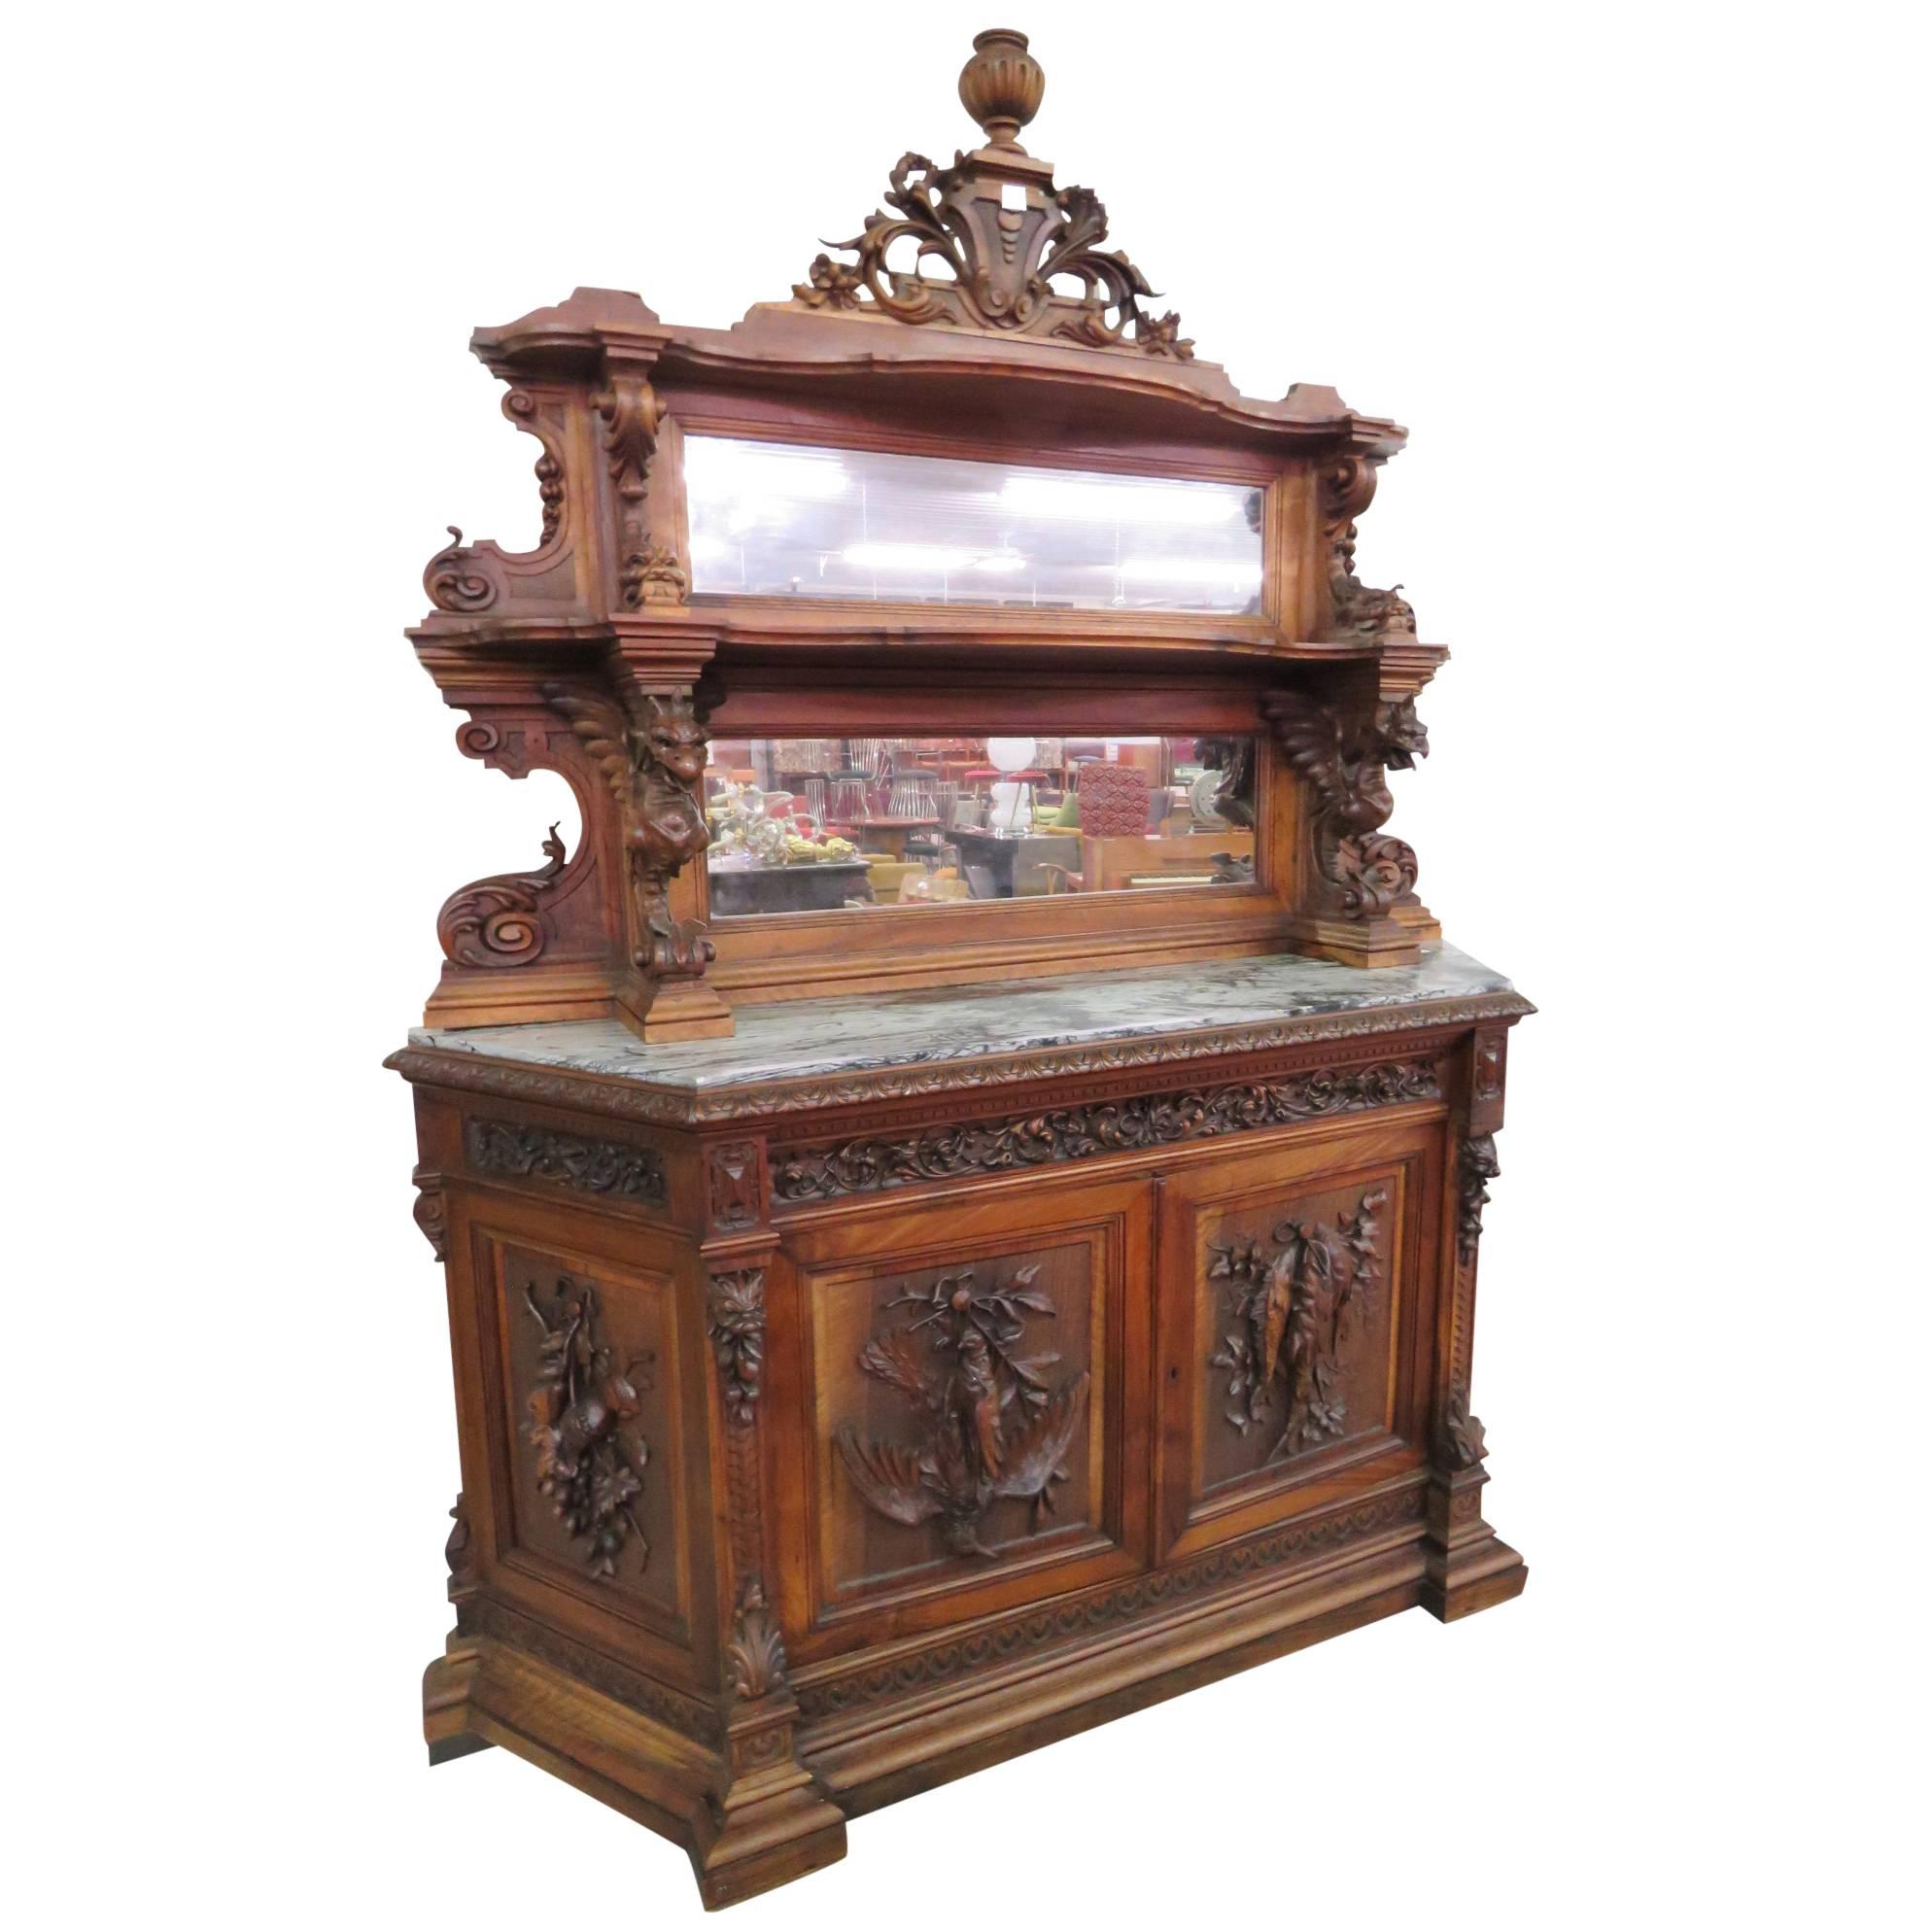 19th Century, Italian Figural Carved Marble-Top Cabinet